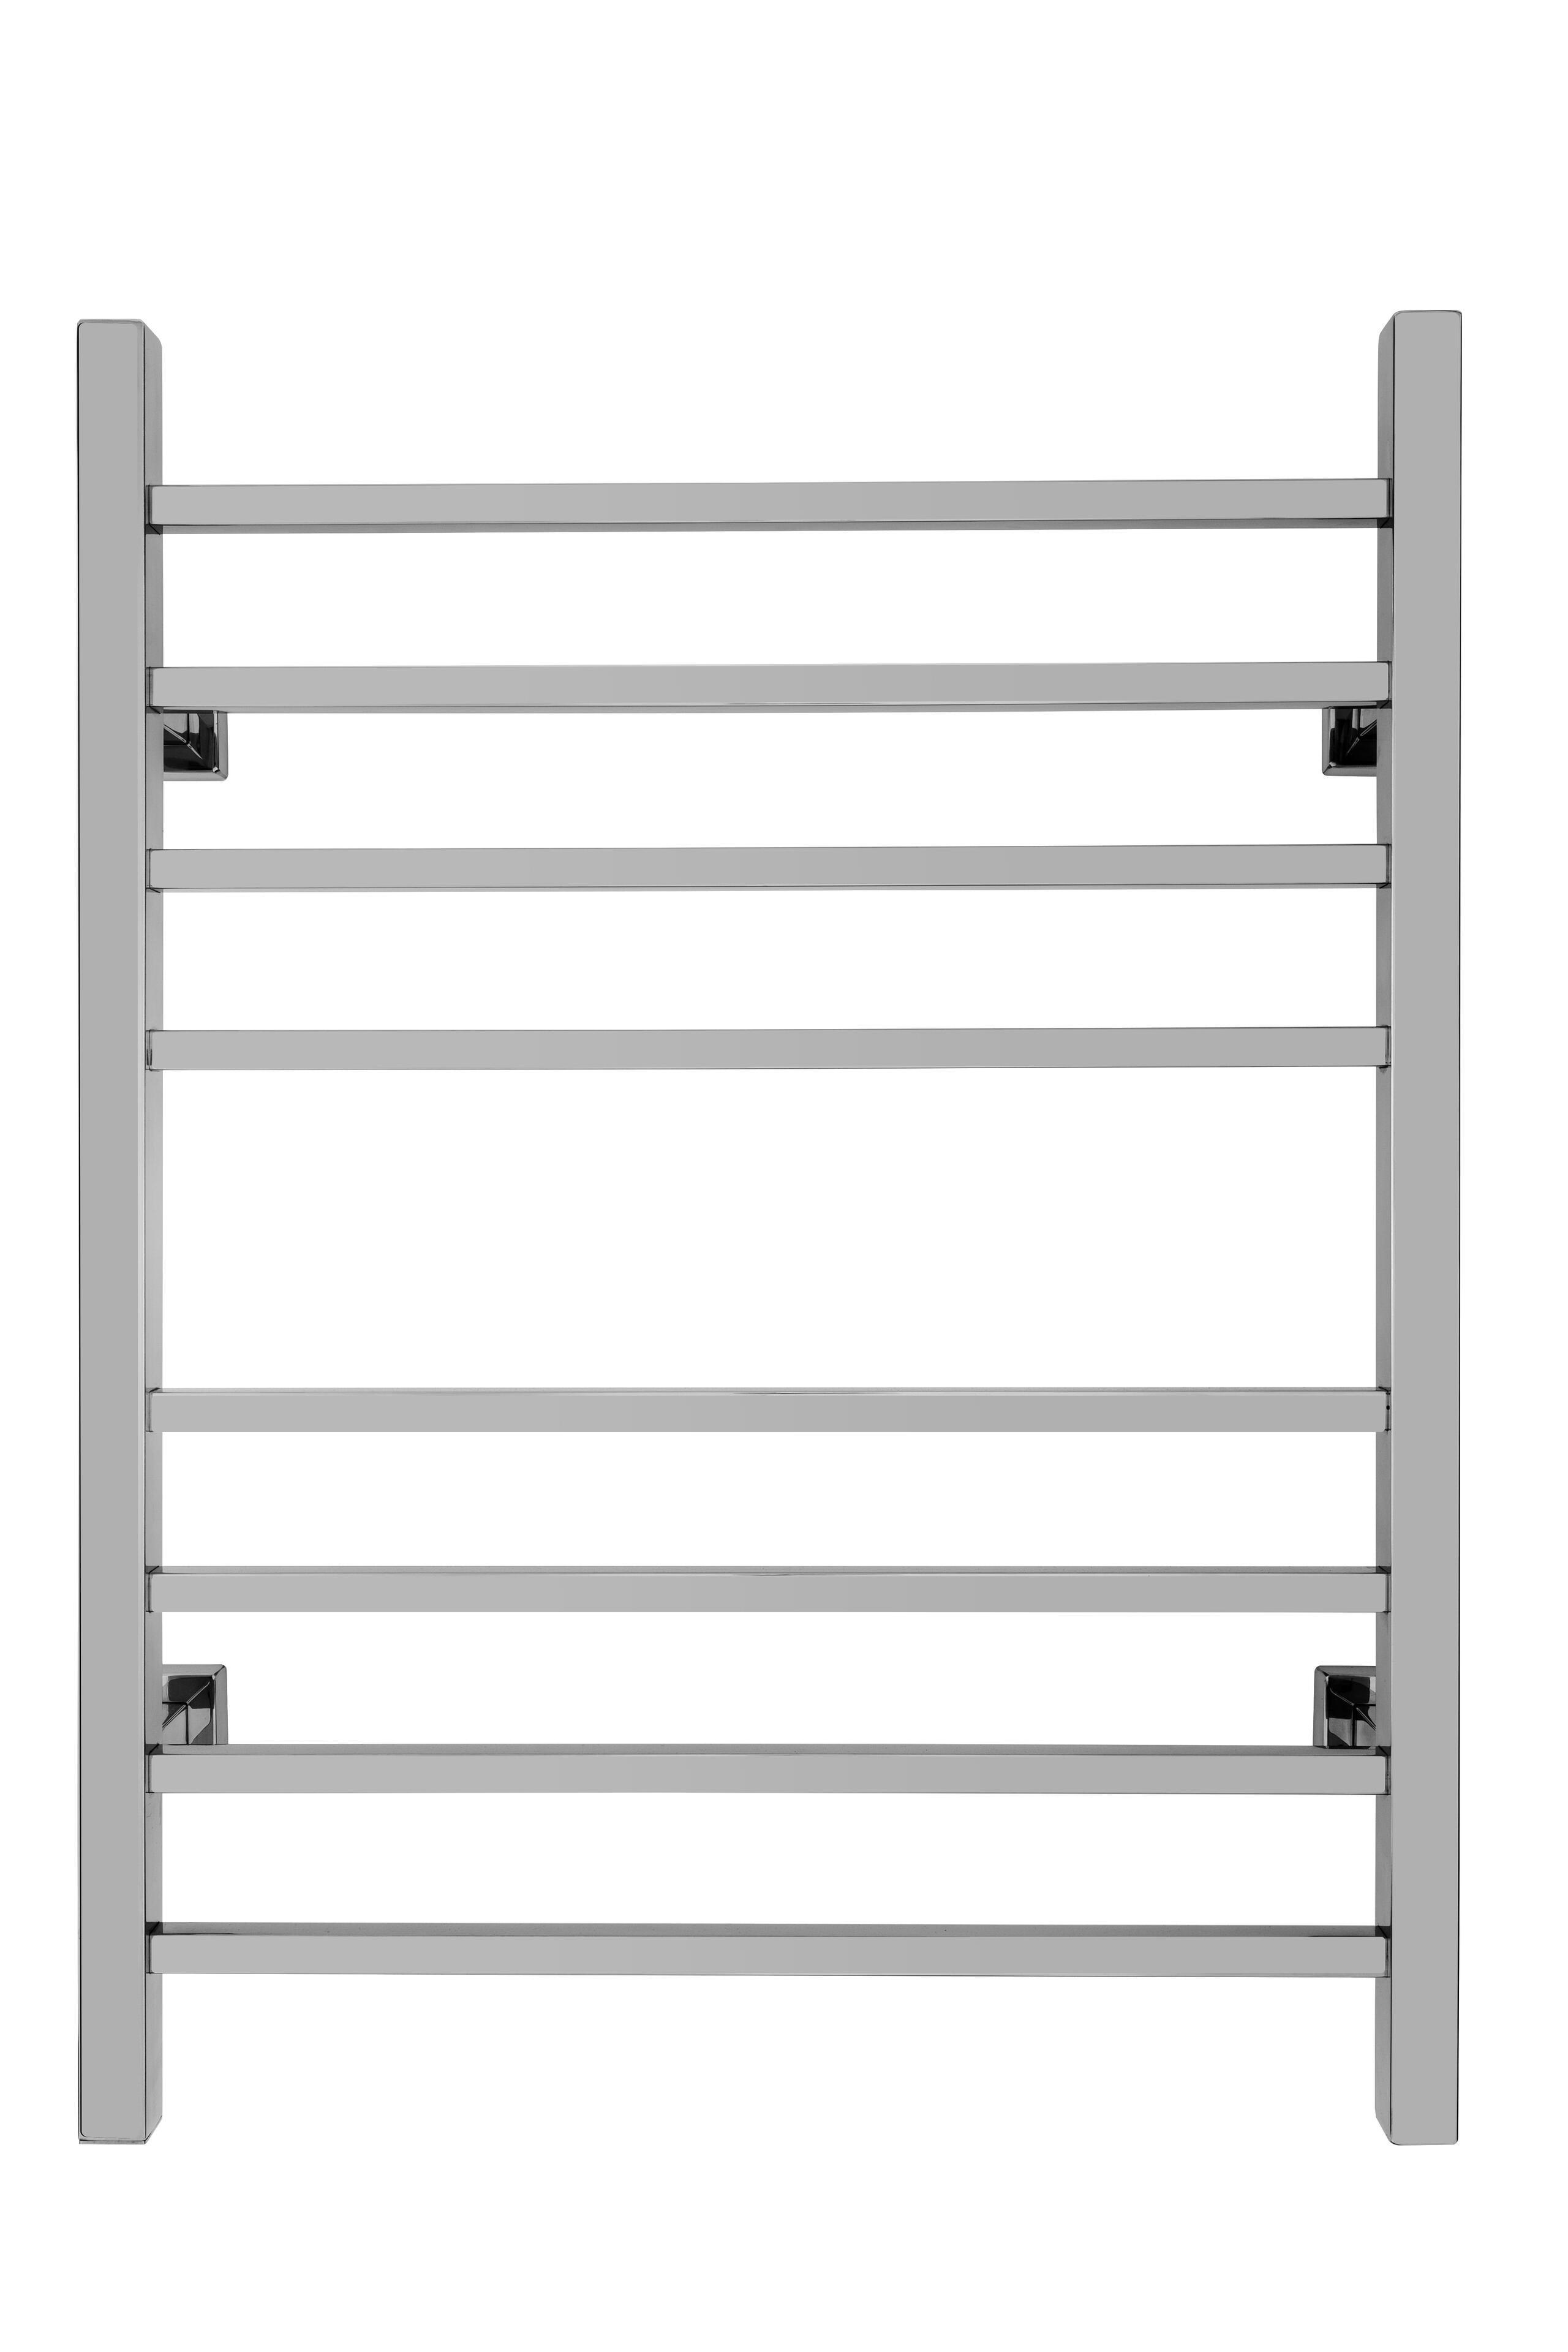 WarmlyYours Sierra Dual Connect (Hardwired and Plug in) Towel Warmer - 24"w x 32"h - towelwarmers